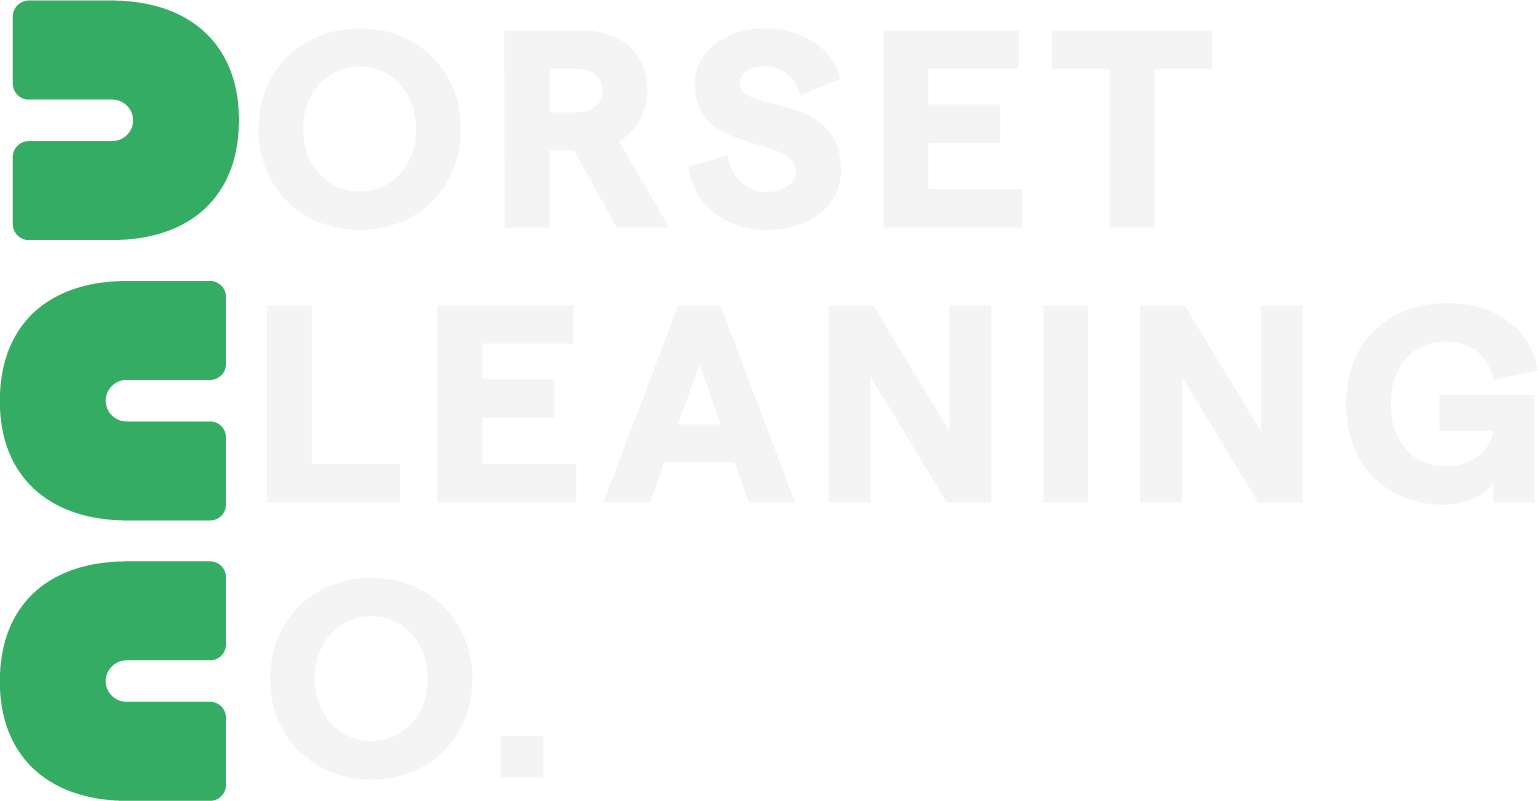 Dorset Cleaning Co